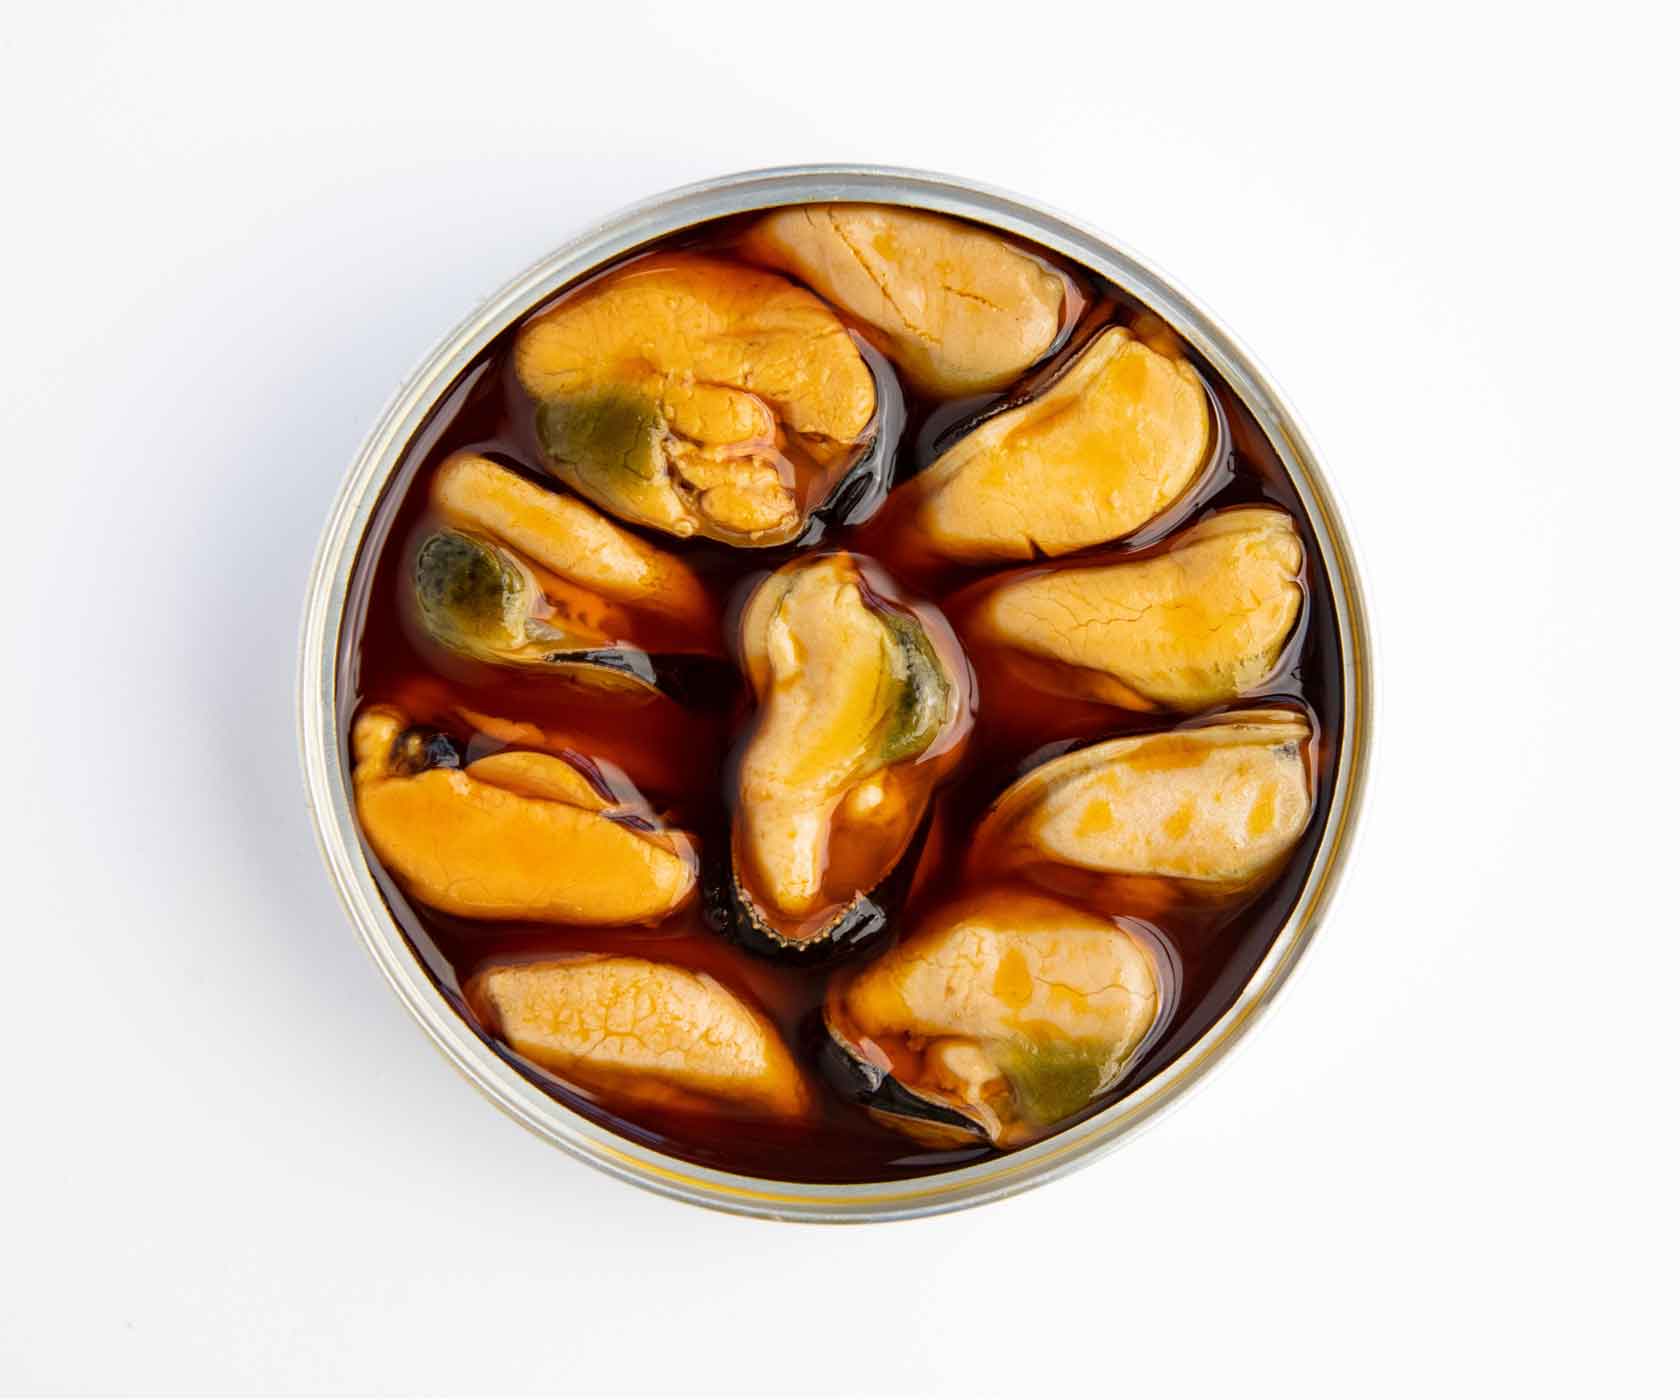 Island Creek x Mariscadora Mussels in Pickled Sauce *BUY 4 PACK & SAVE 20%*